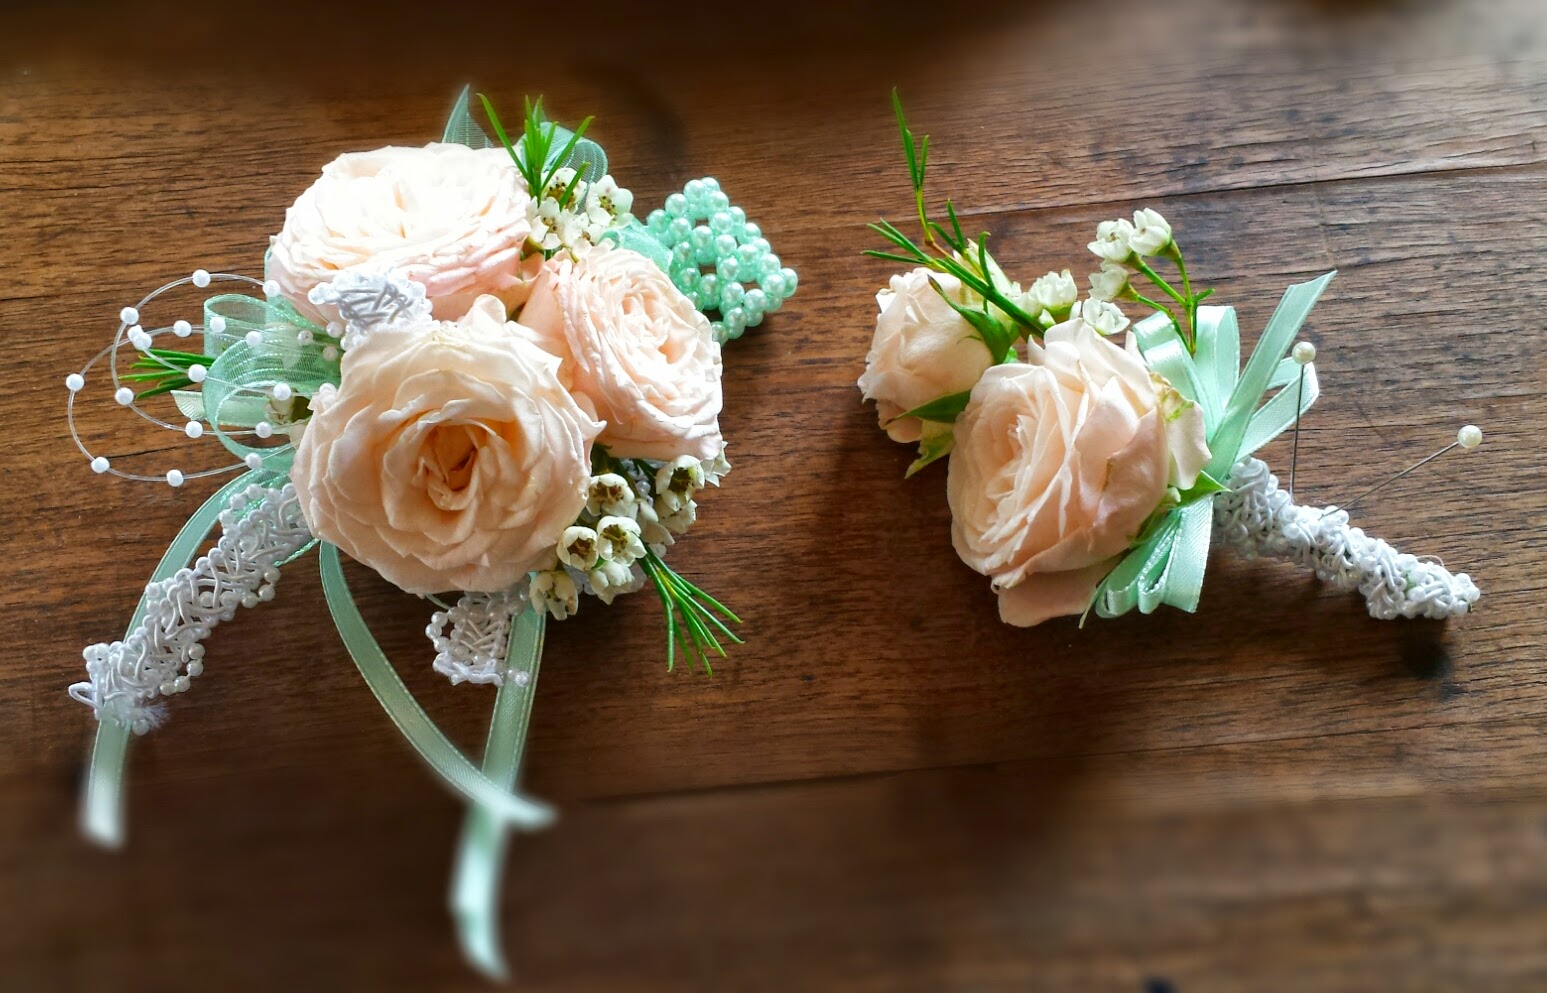 Prom '15 wrap up - Roses. Garden miniature rose corsage and boutonniere